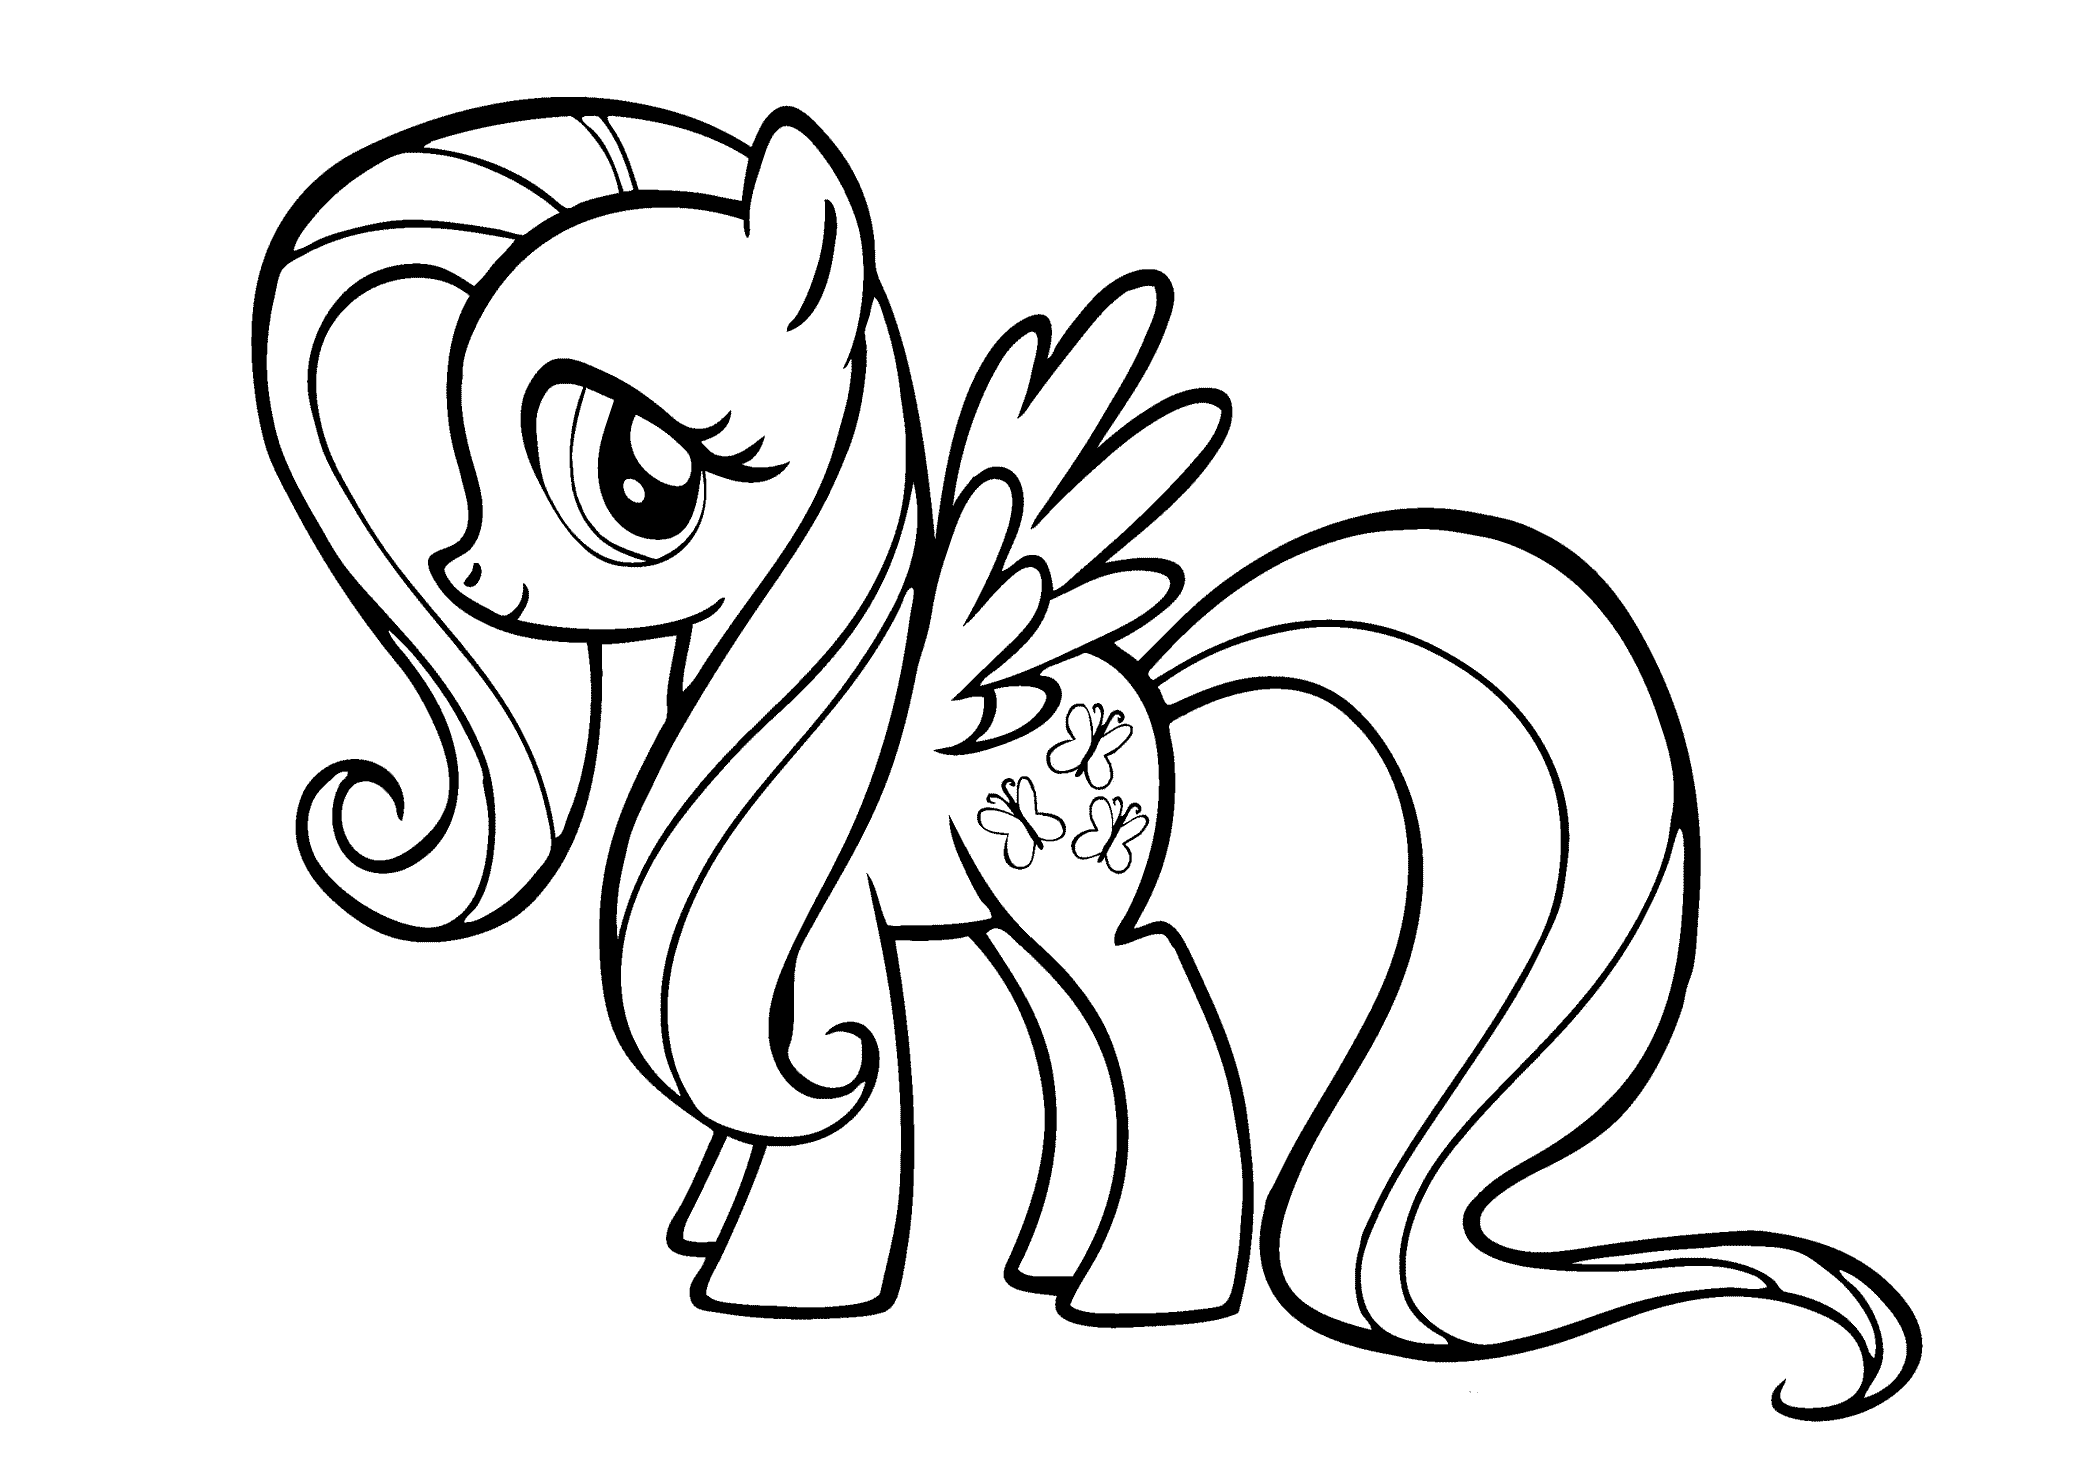 coloring book my little pony - High Quality Coloring Pages